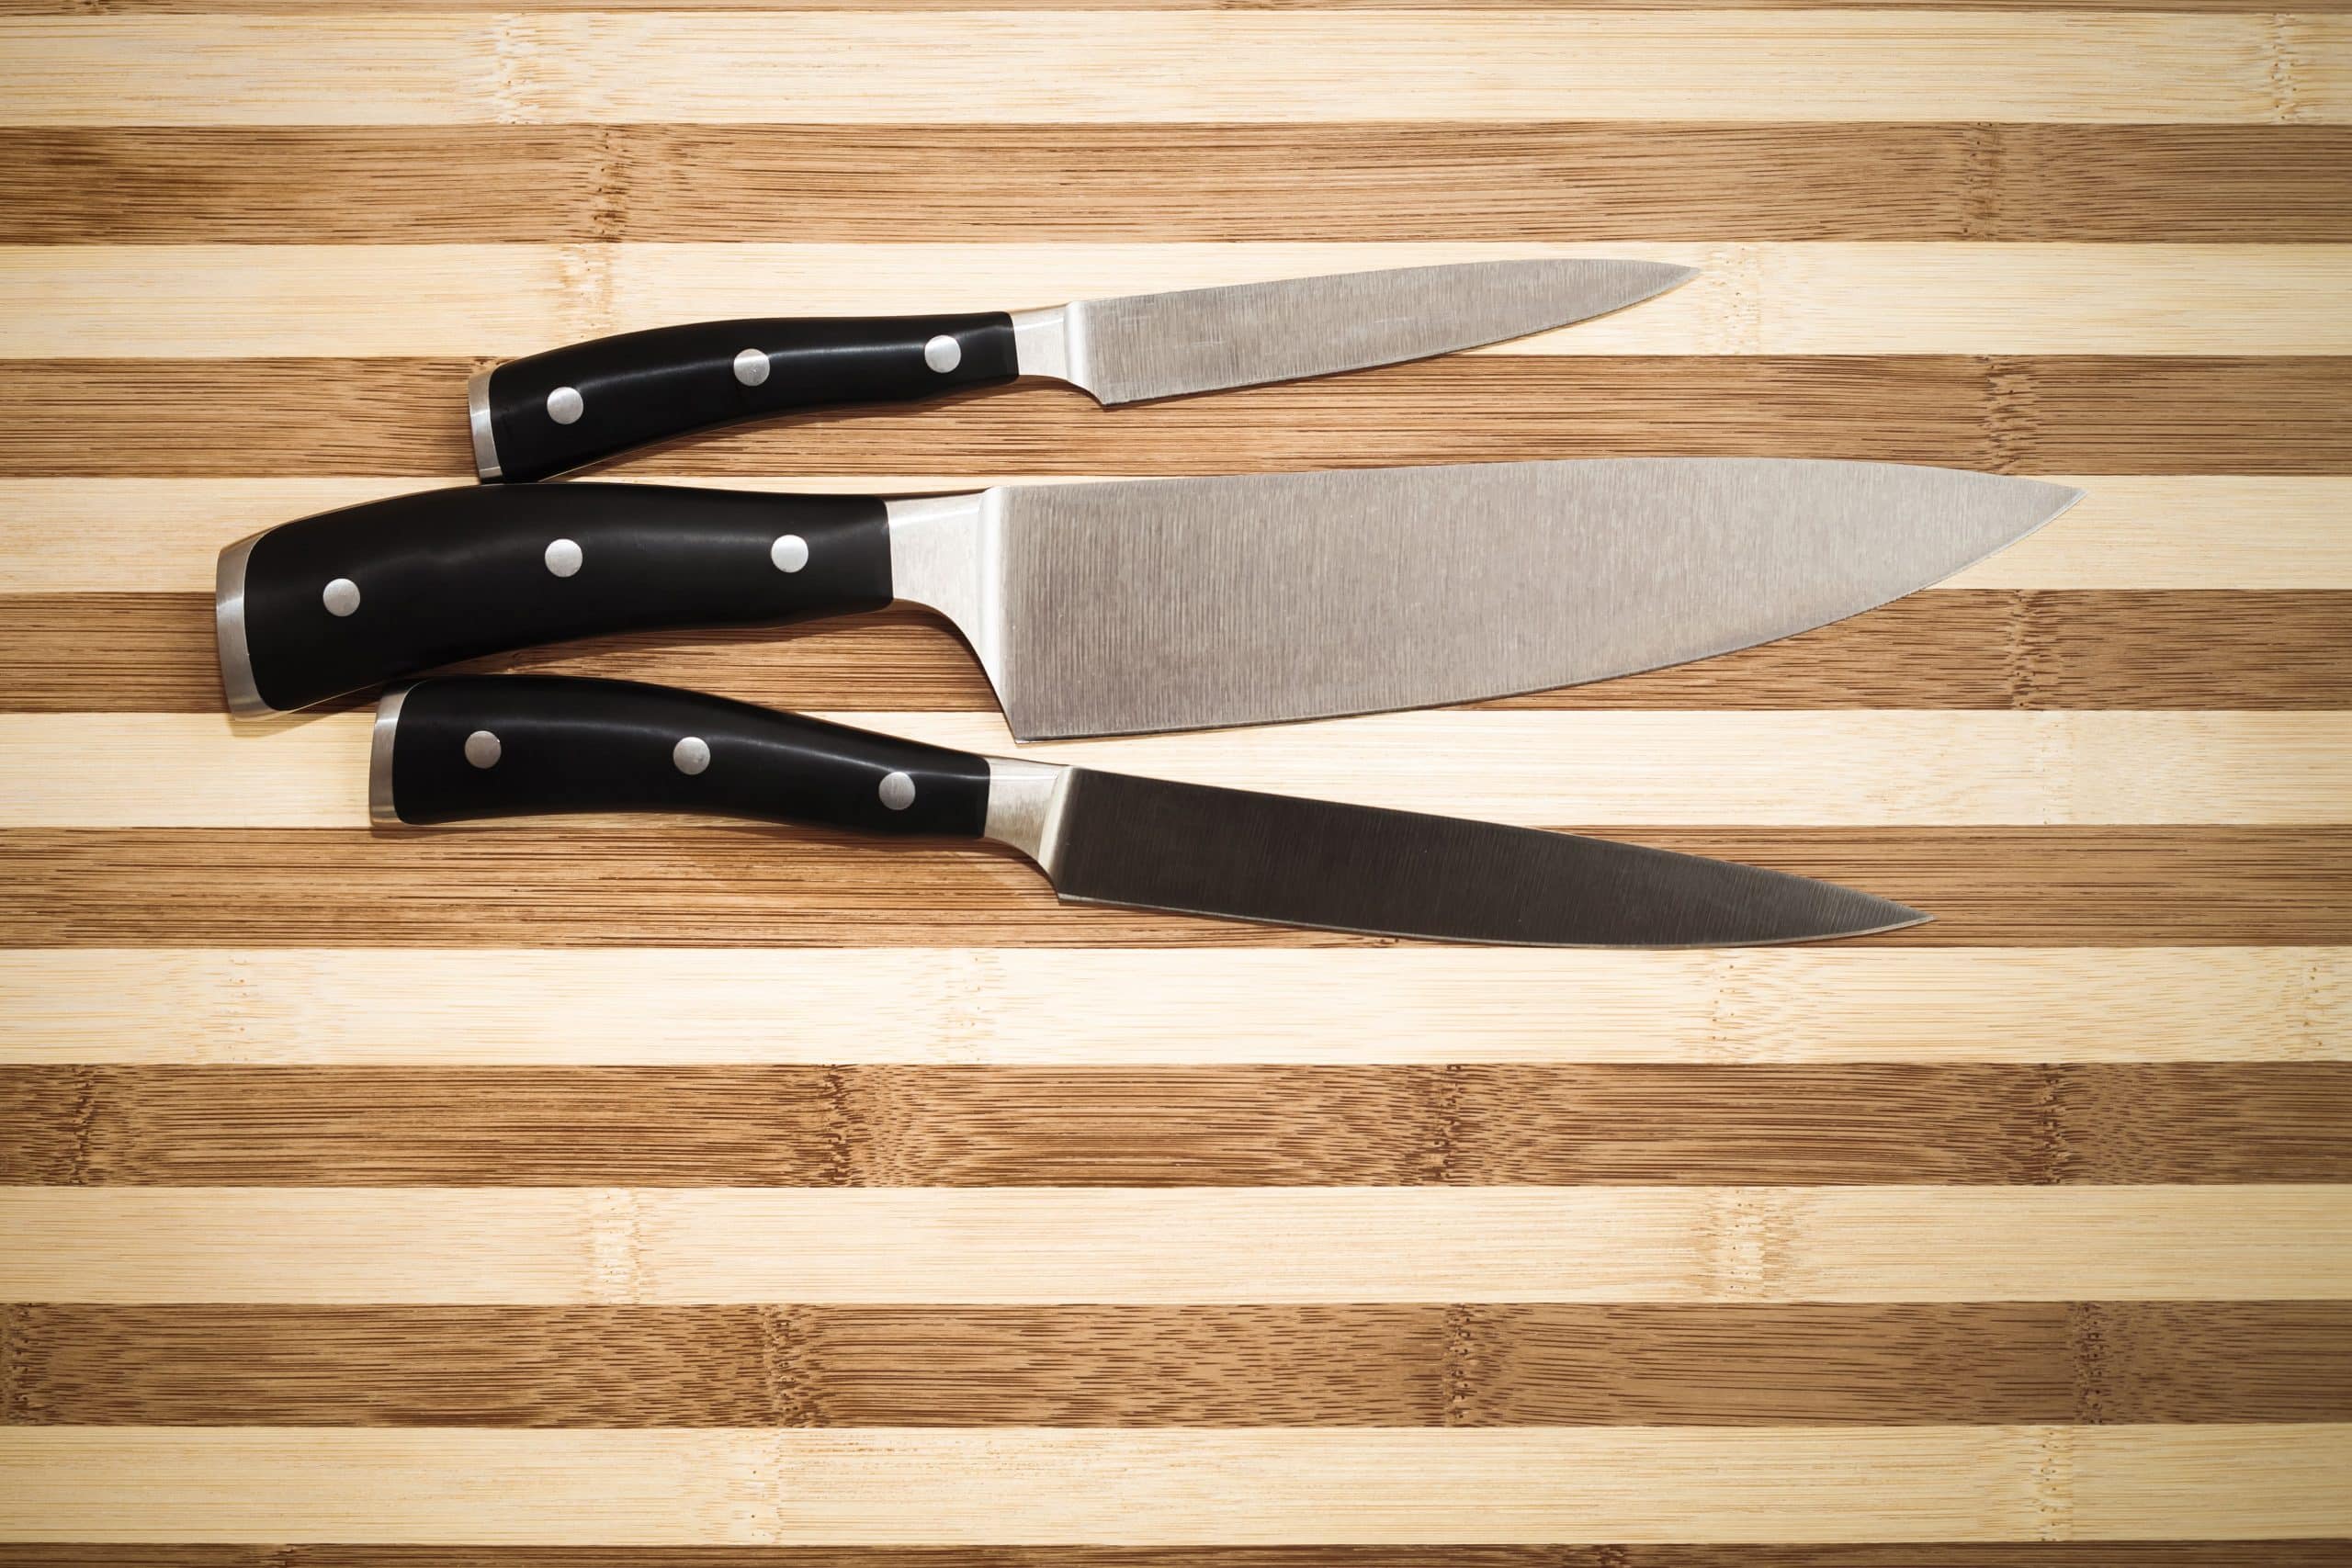 Three utility kitchen knifes on a wooden- cutting board